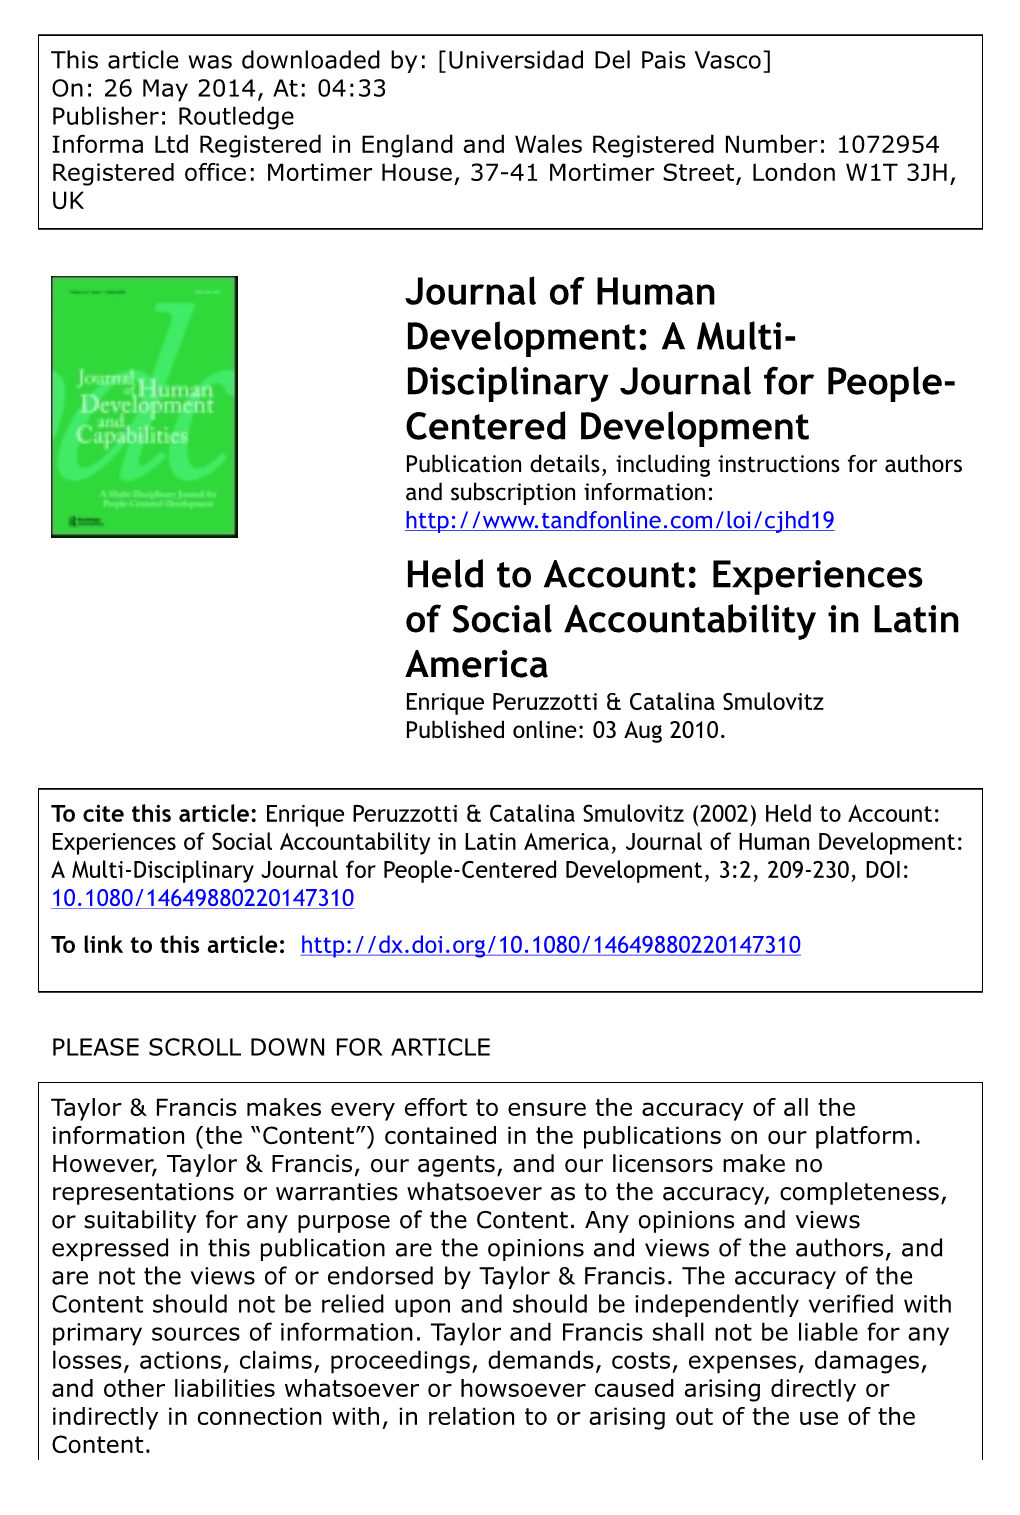 Held to Account: Experiences of Social Accountability in Latin America Enrique Peruzzotti & Catalina Smulovitz Published Online: 03 Aug 2010